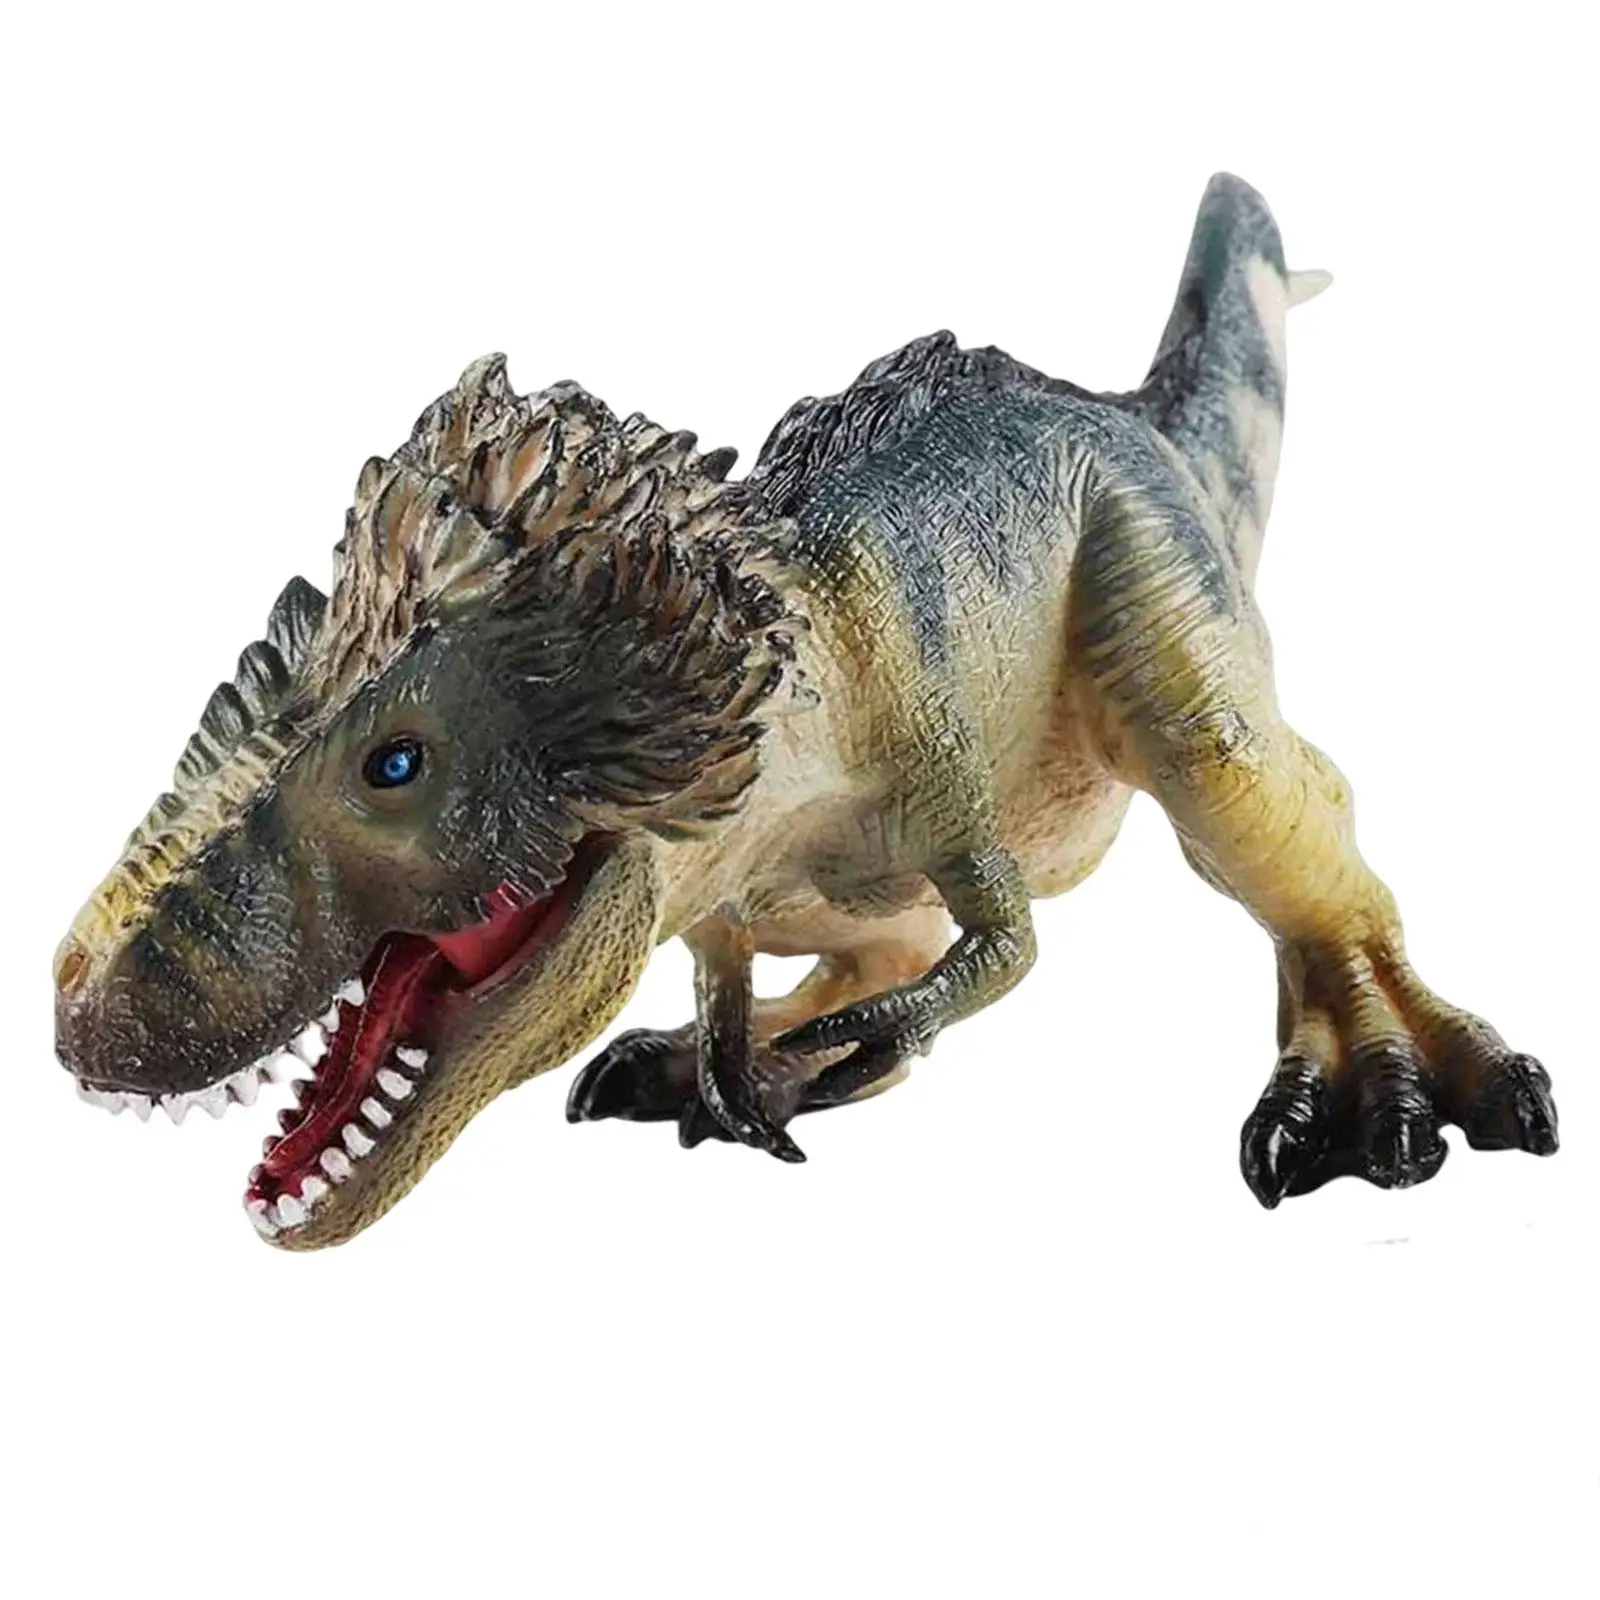 Simulation Tyrannosaurus Action Figurine for Collections Party Toy Ornament